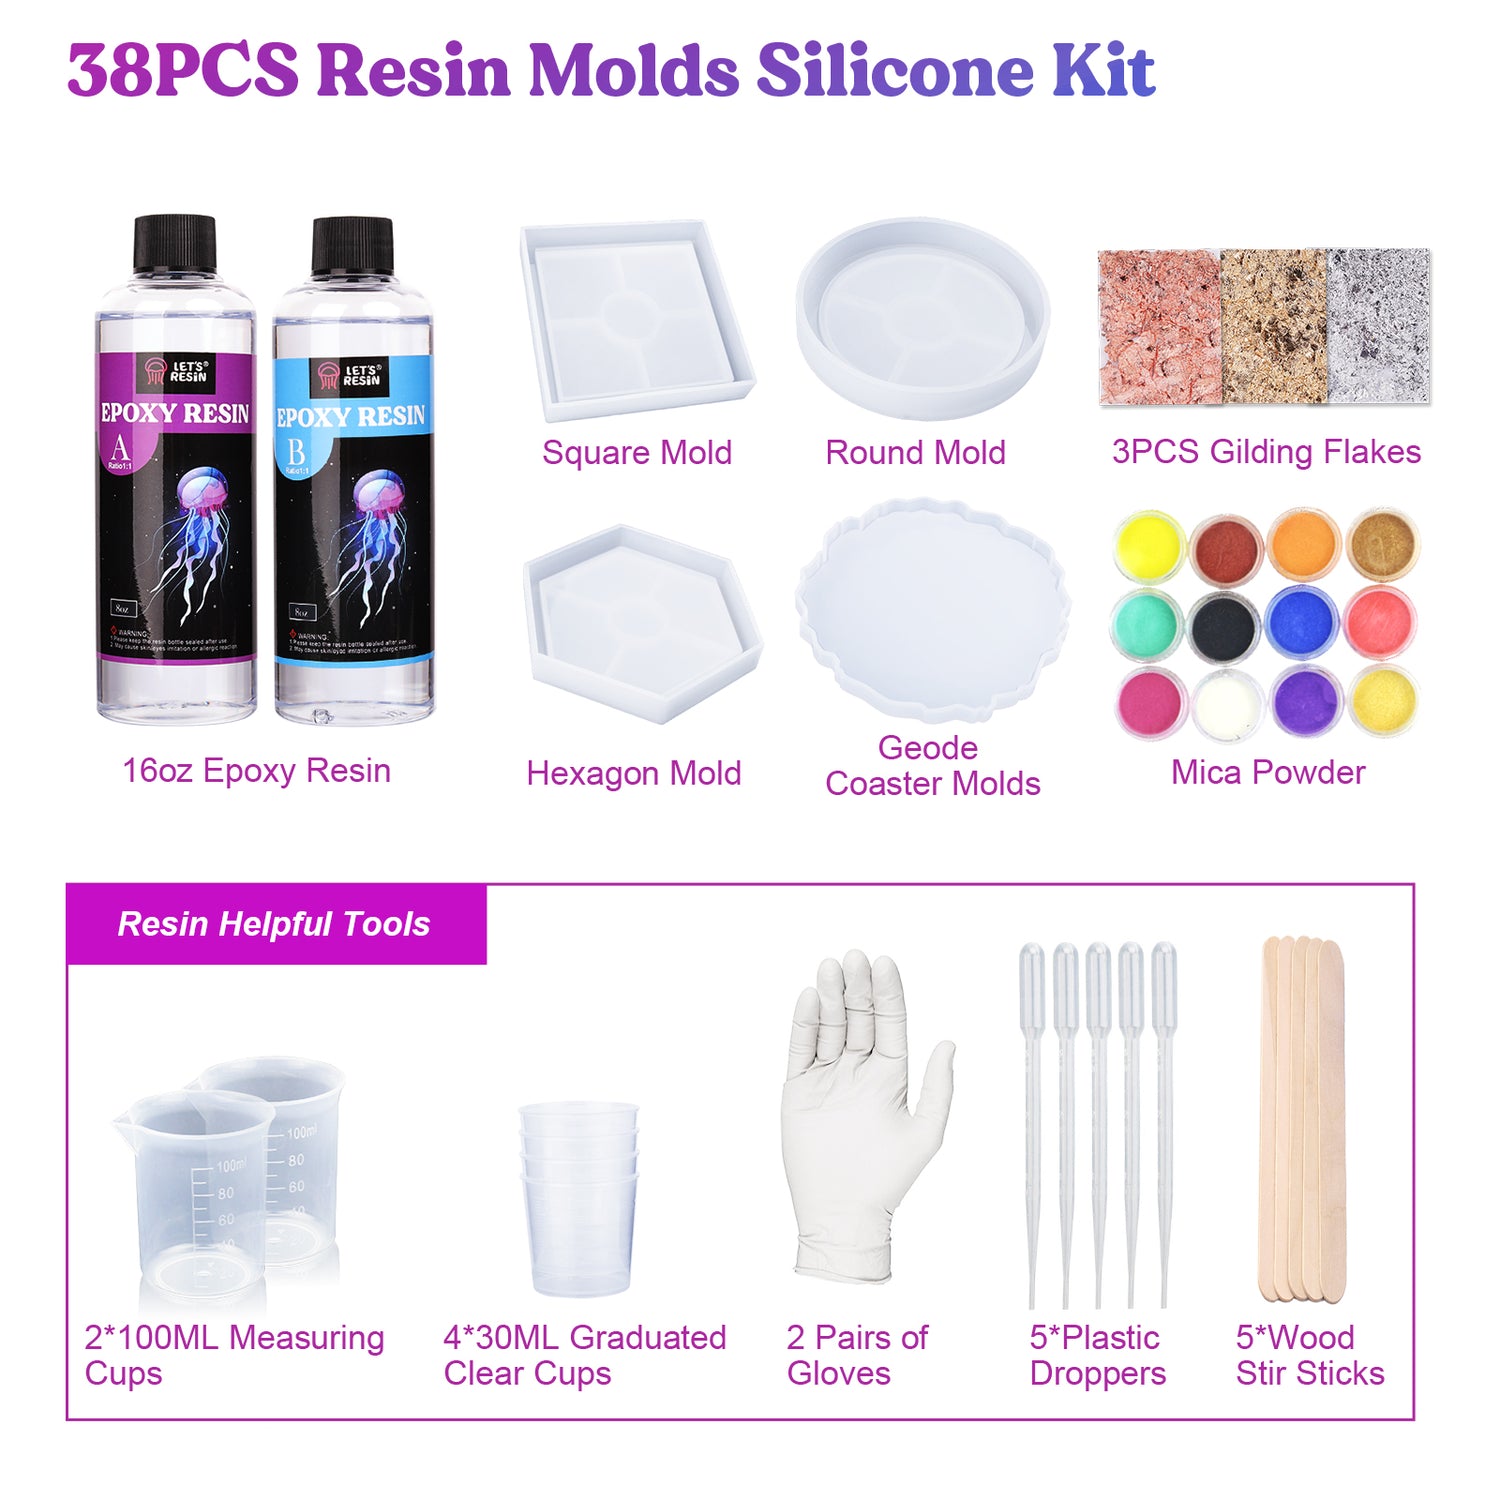  LET'S RESIN Resin Molds Silicone Kit for Beginners,7 PCS Large Epoxy  Resin Molds Including Pyramid, Sphere,Cube, Rectangle,Candle Holder Resin  Molds,Round/Square Coaster Molds for Resin Casting : Arts, Crafts & Sewing